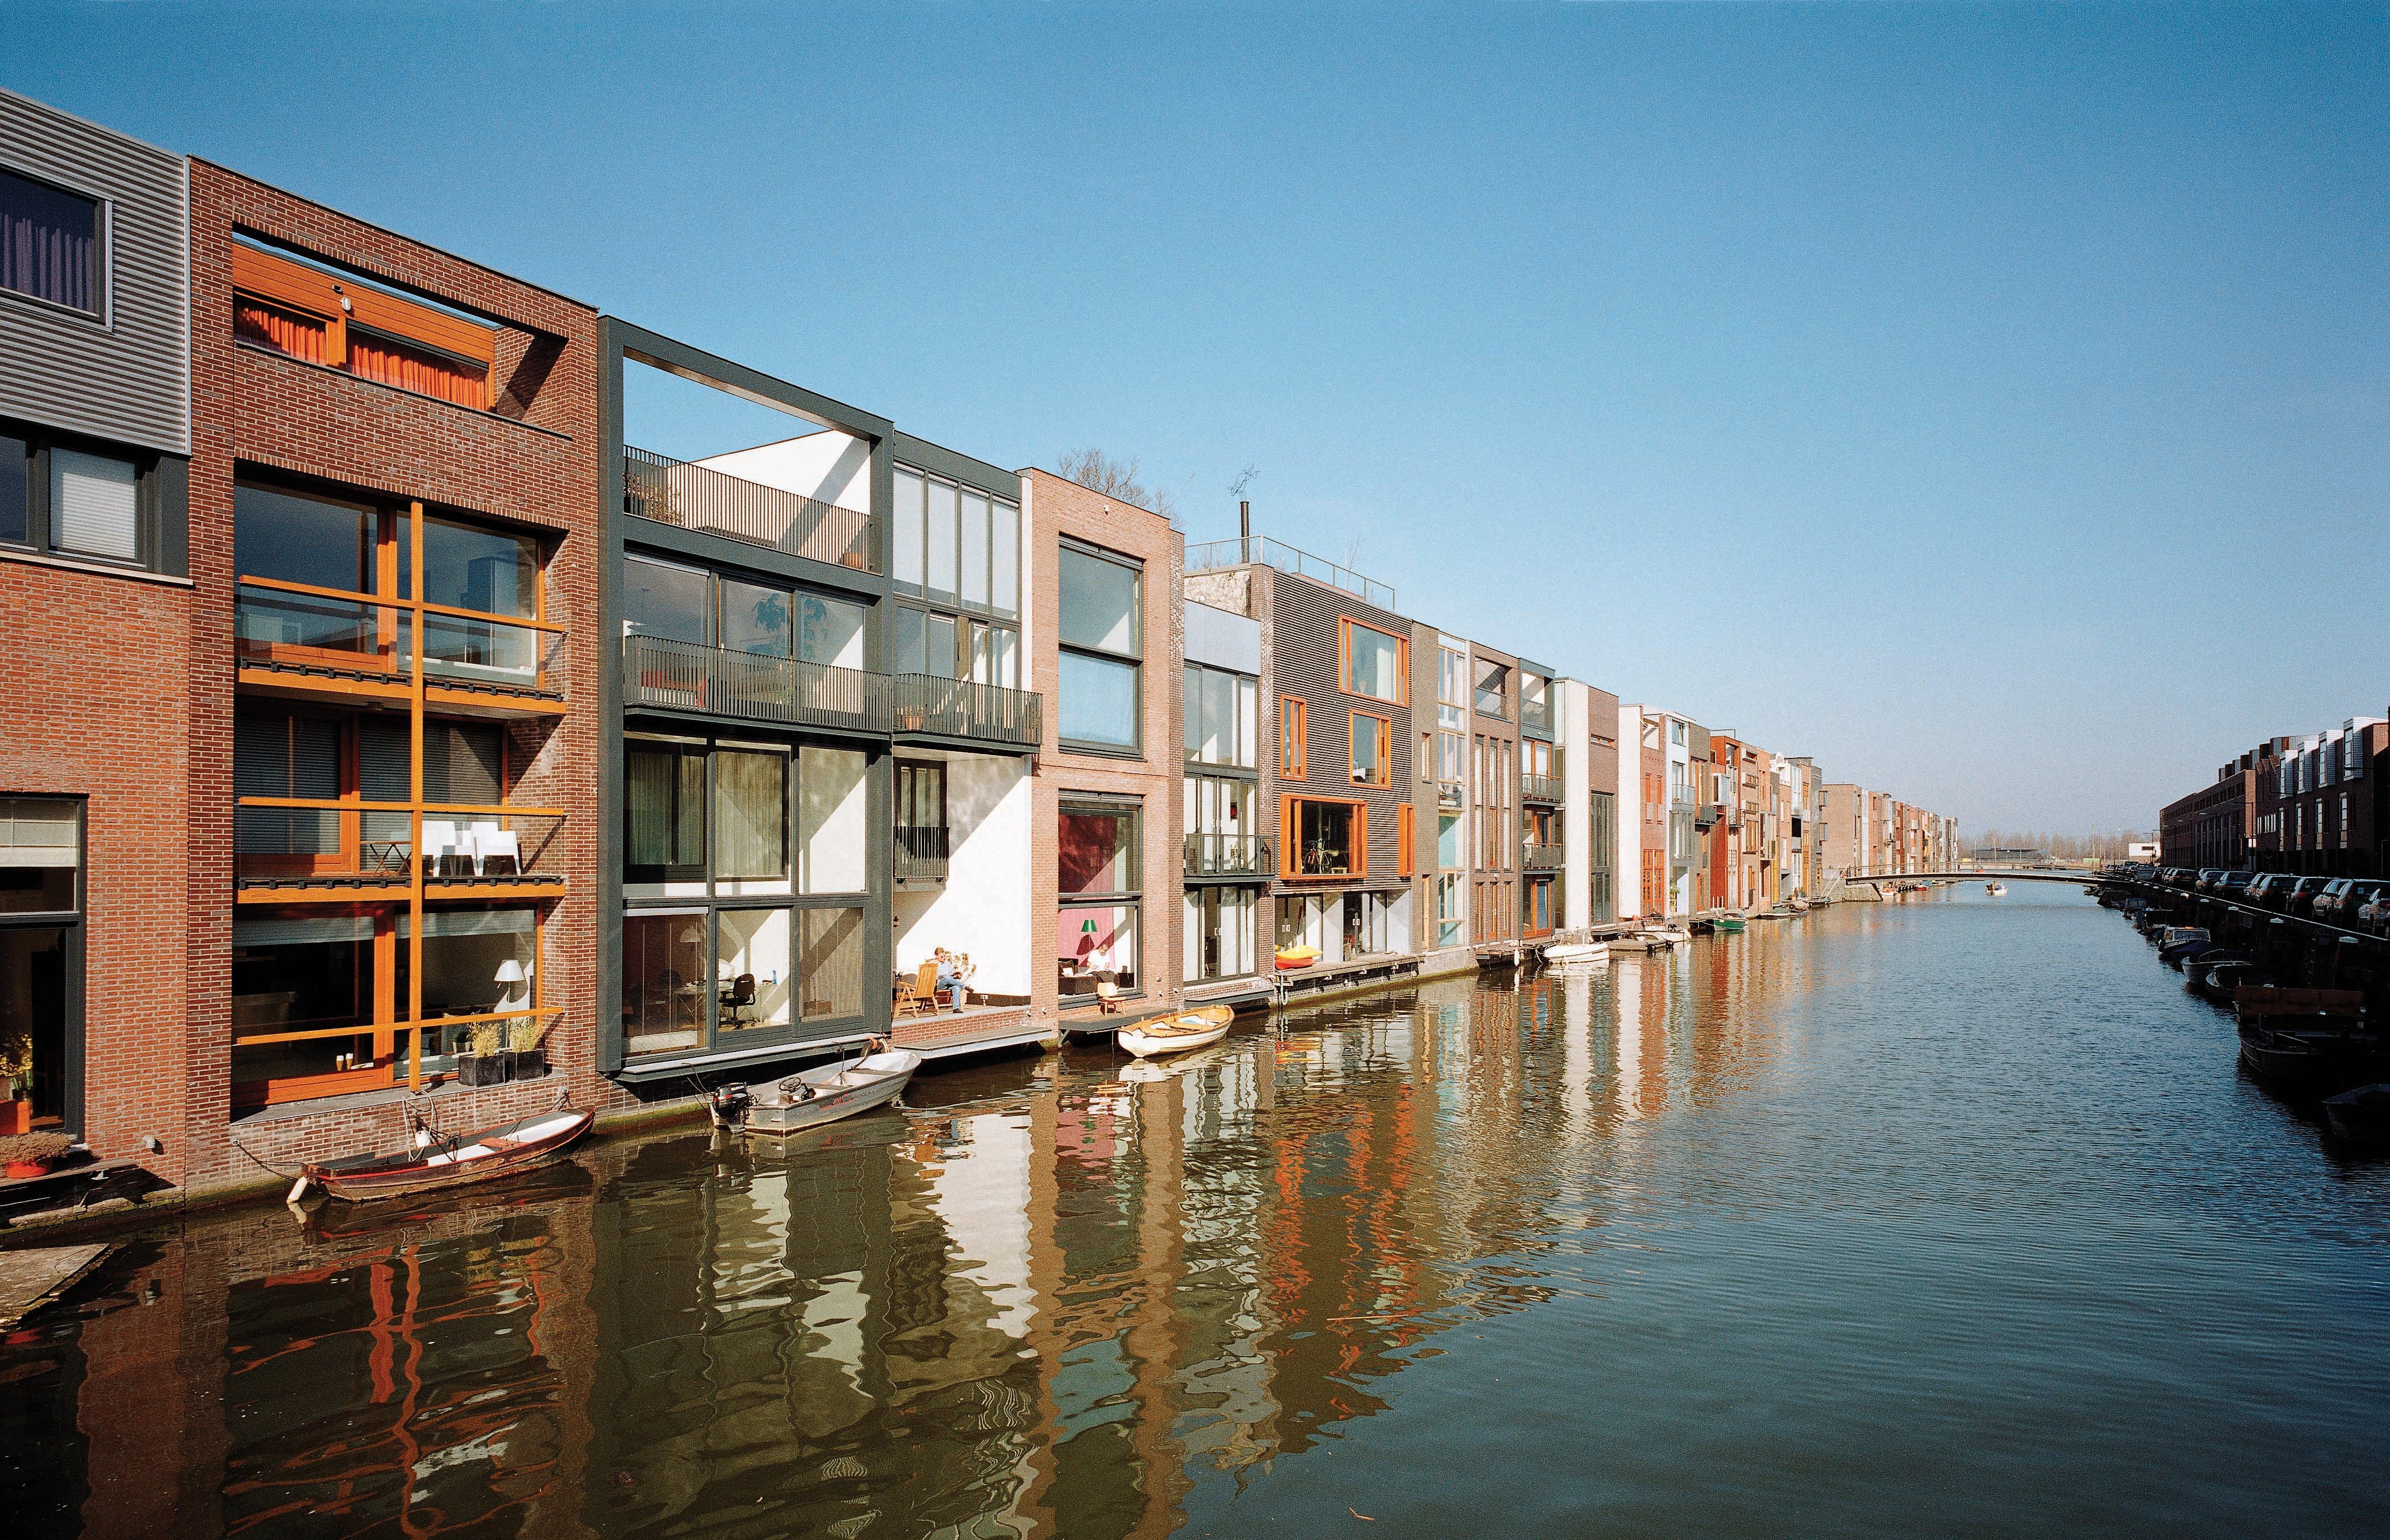 Amsterdam's canal houses are a Unesco World Heritage Site. Photo: SCMP handout